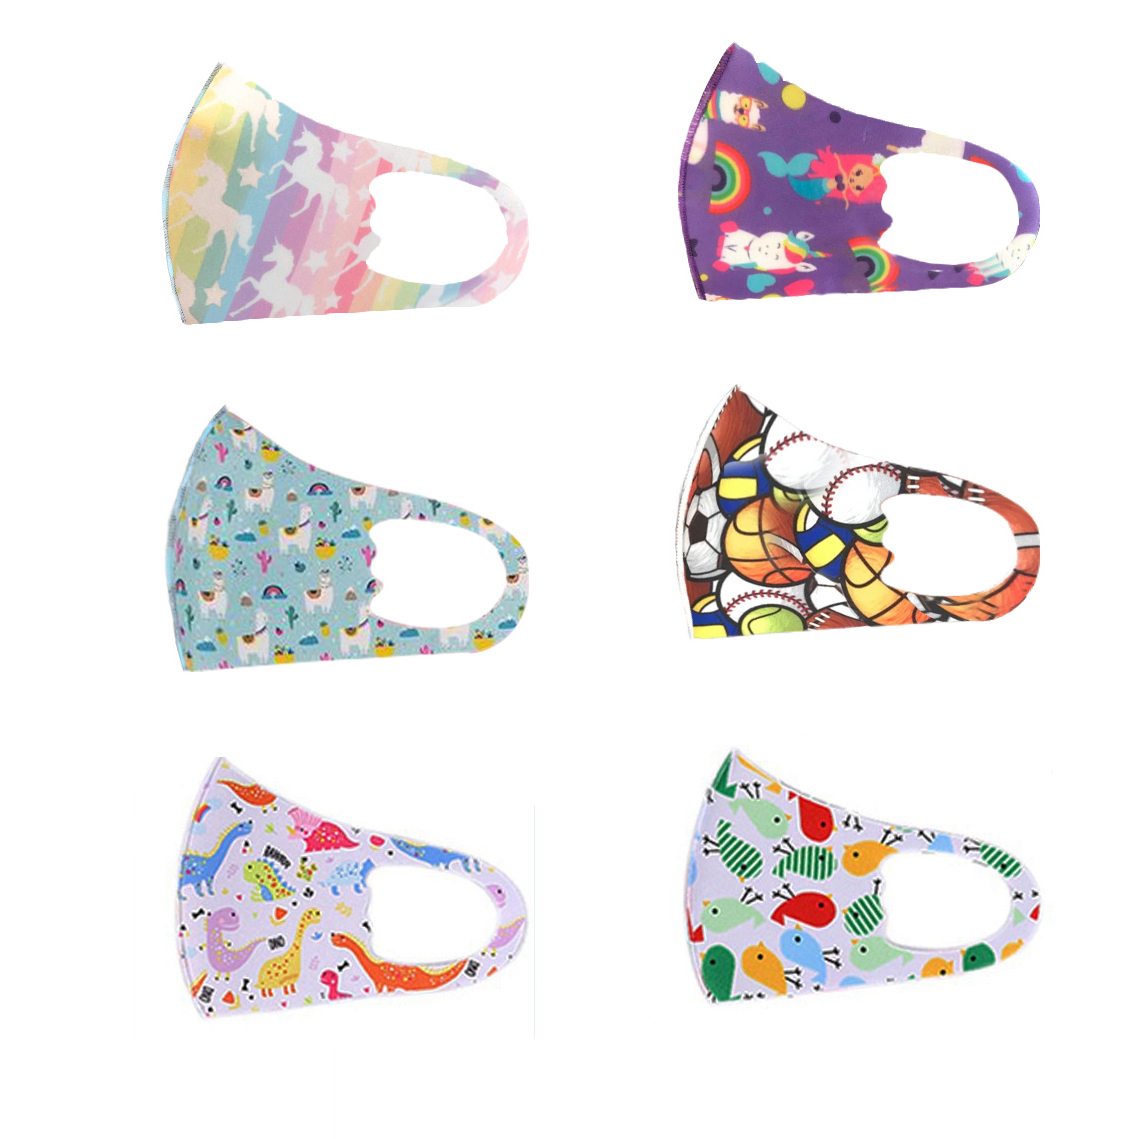 5-Pack Mystery Deal: Kids Reusable Washable Cute Cartoon Breathable Seamless FaceMasks